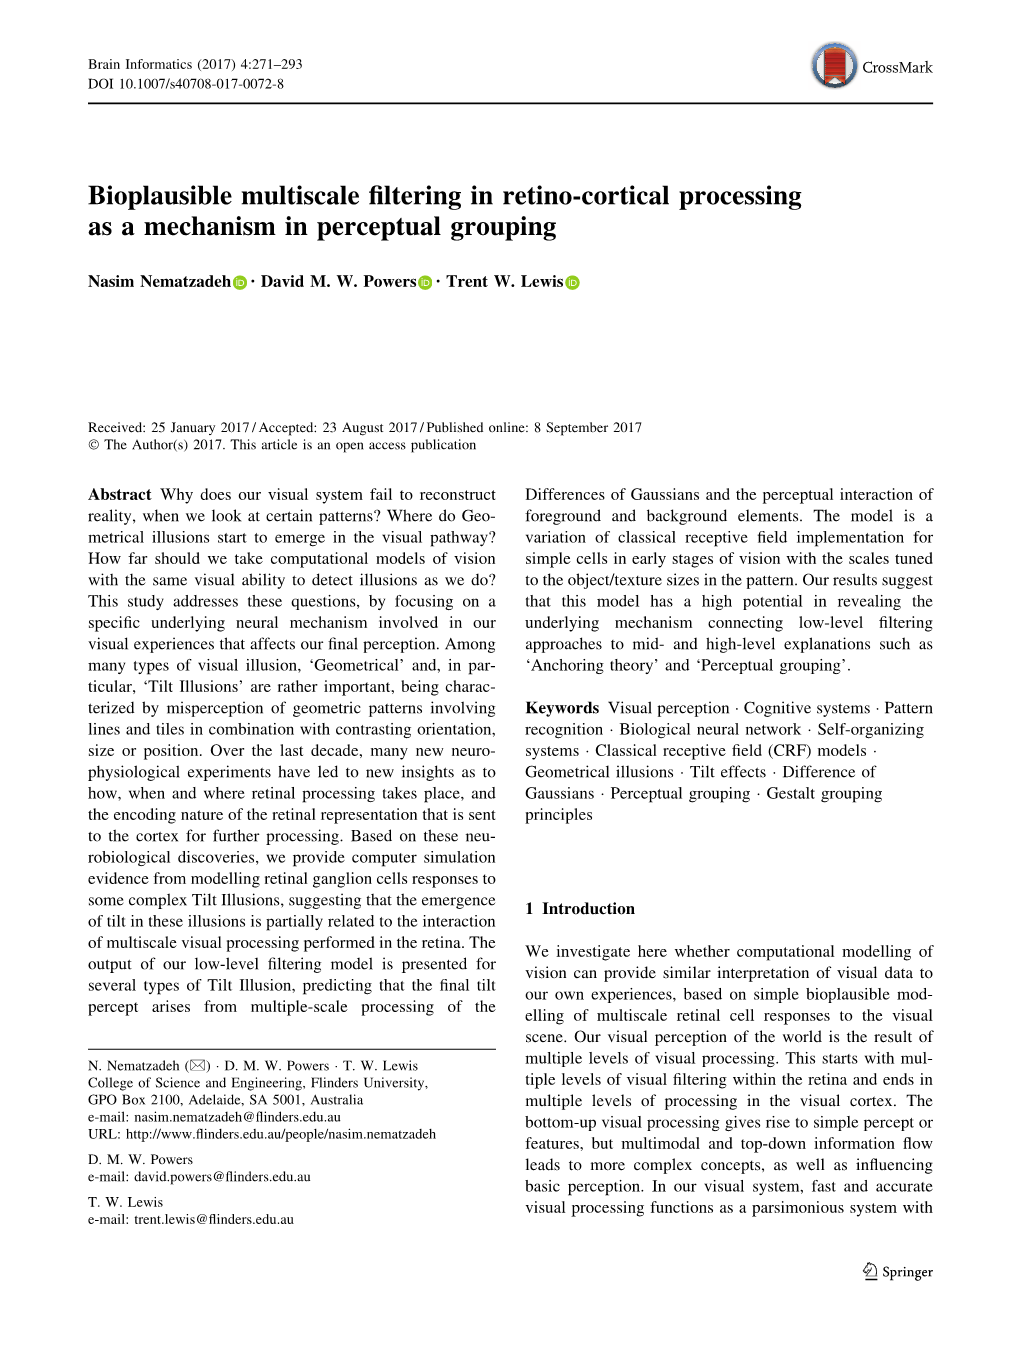 Bioplausible Multiscale Filtering in Retino-Cortical Processing As A